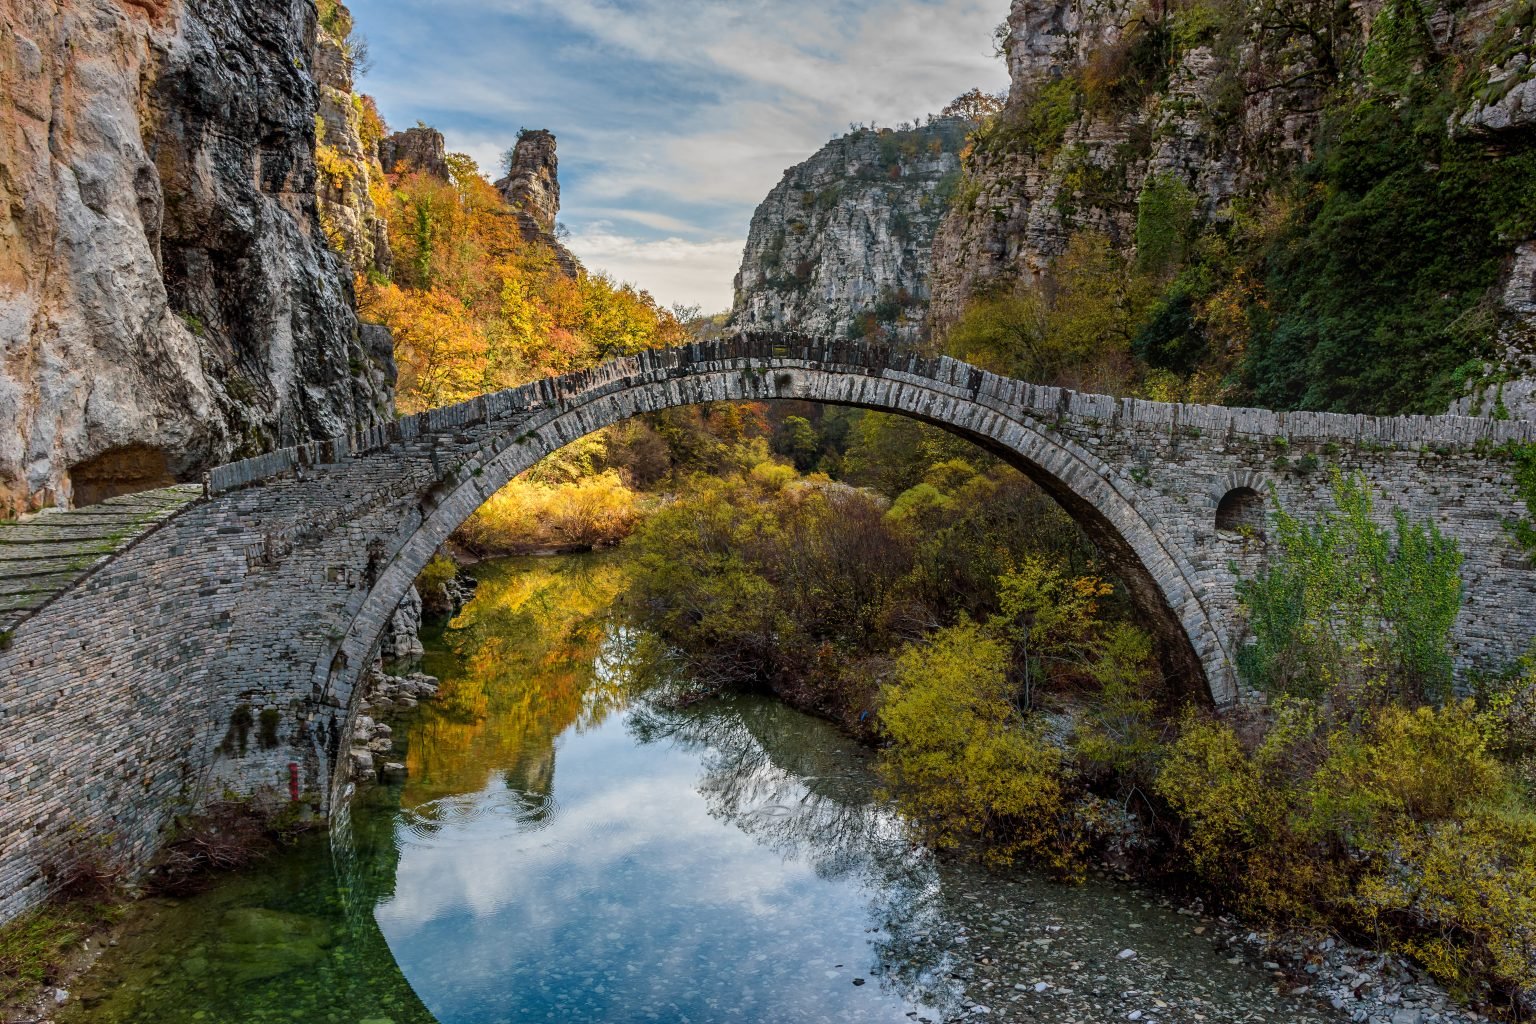 Vikos Gorge: A Breathtaking Natural Wonder in the Heart of Greece